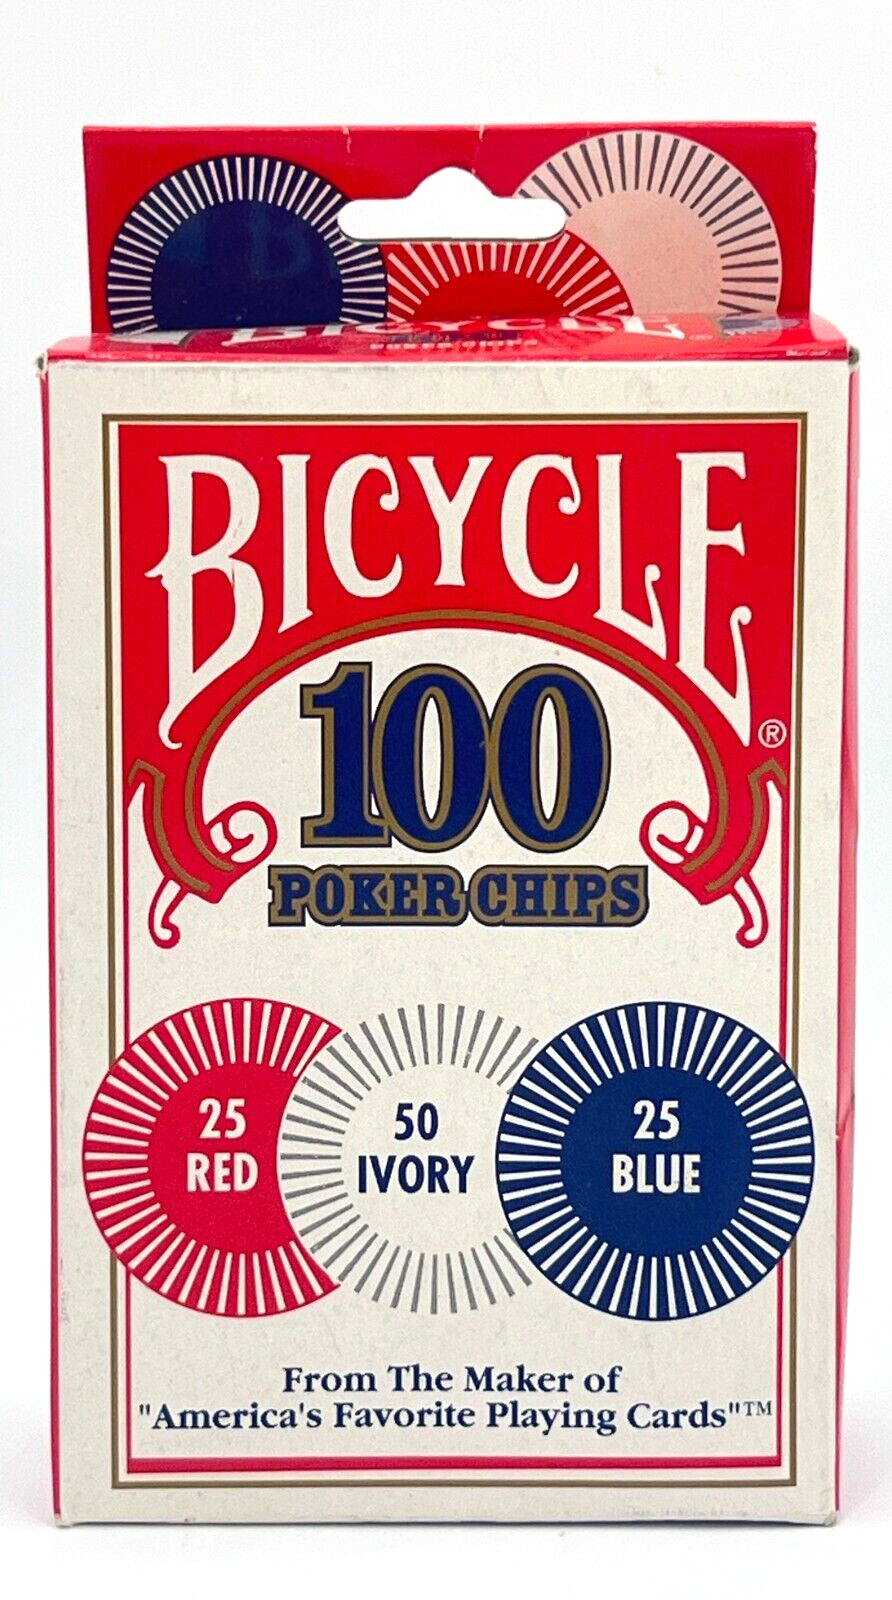 BICYCLE Poker Chips 100 Count Plastic Red Ivory Blue Interlocking Casino-Style - $11.60